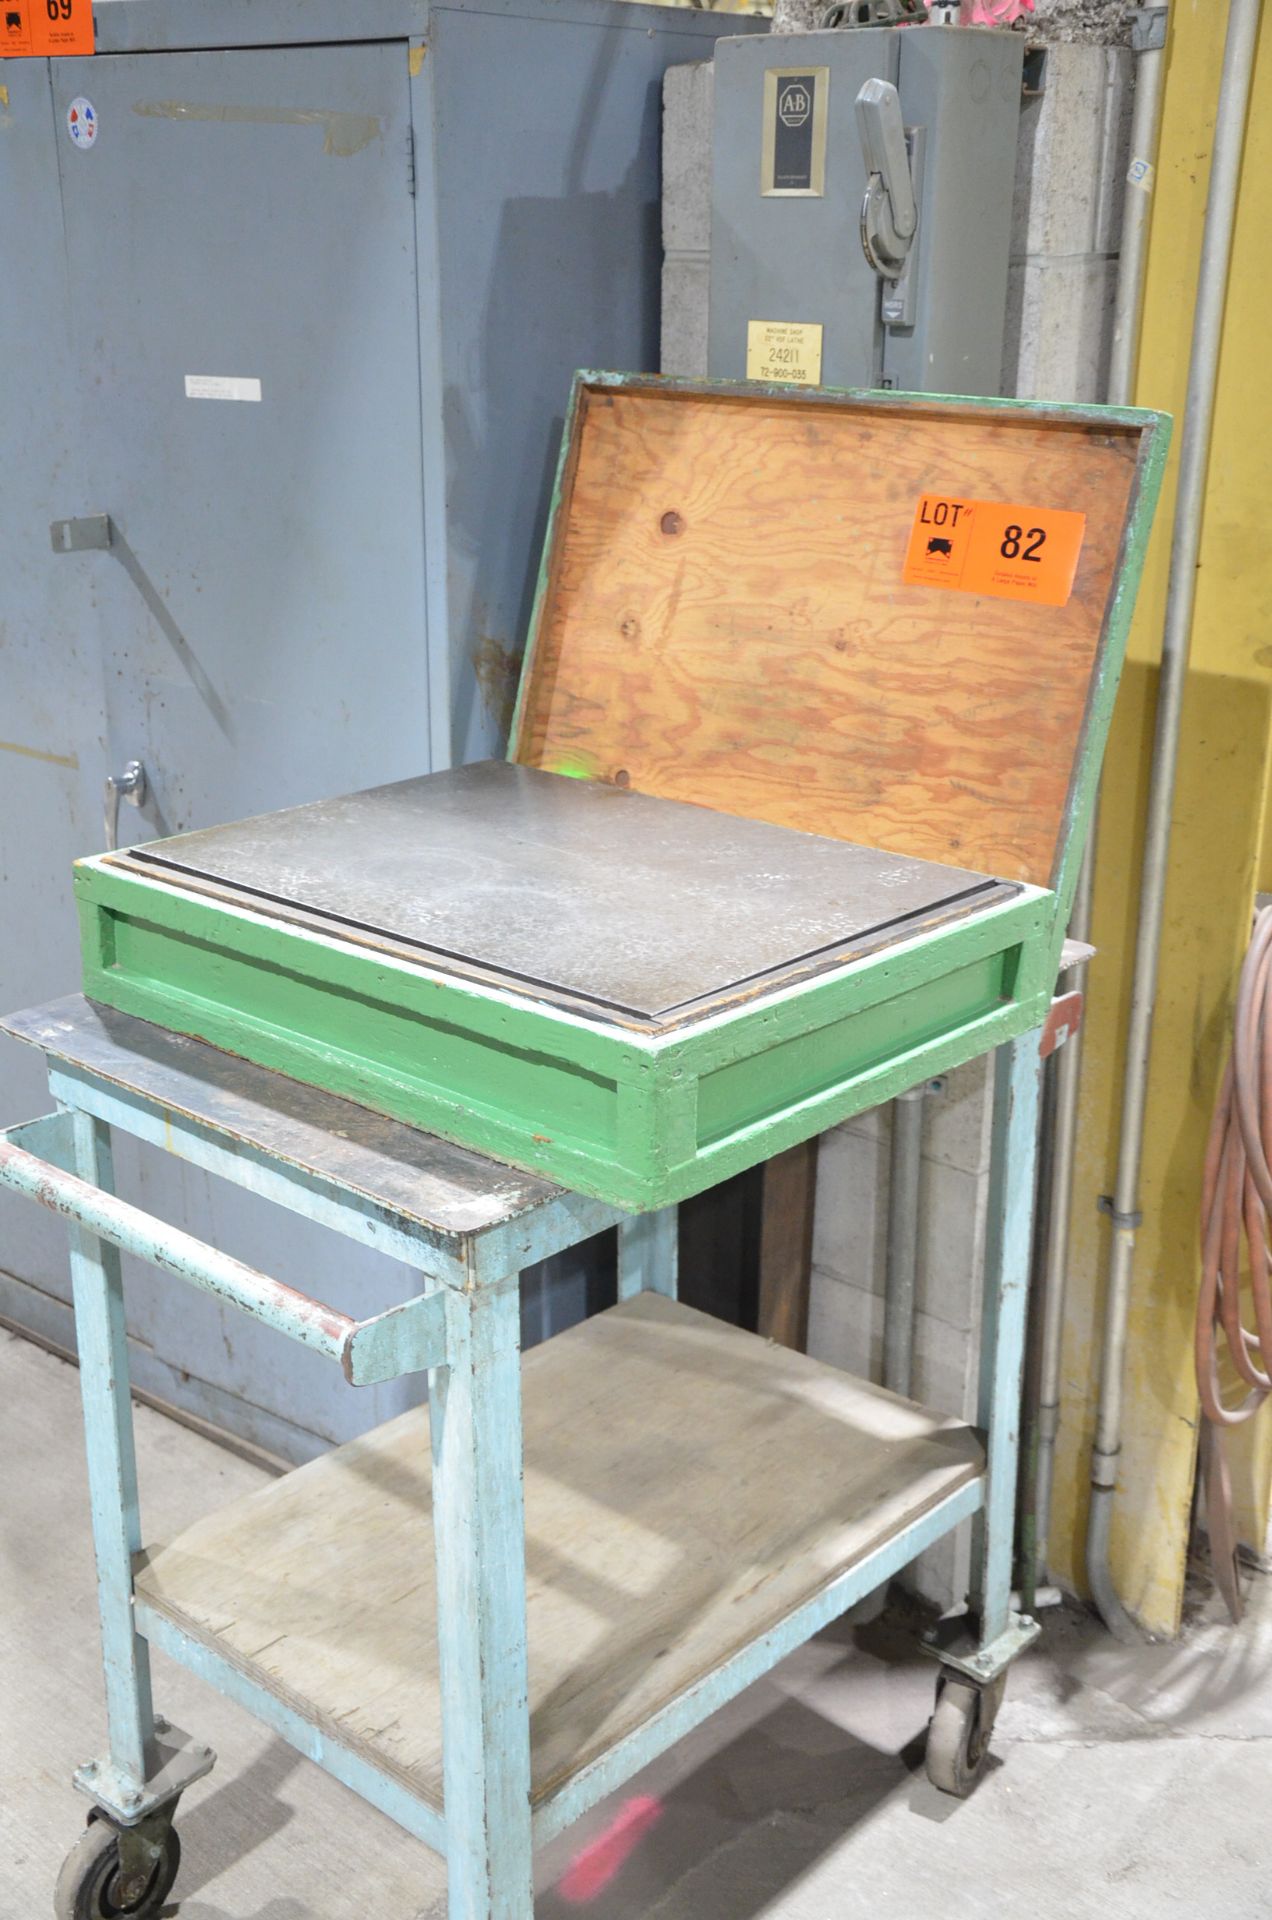 24" X 18" STEEL SETUP PLATE WITH CART [RIGGING FEE FOR LOT #82 - $TBD USD PLUS APPLICABLE TAXES] - Image 2 of 3